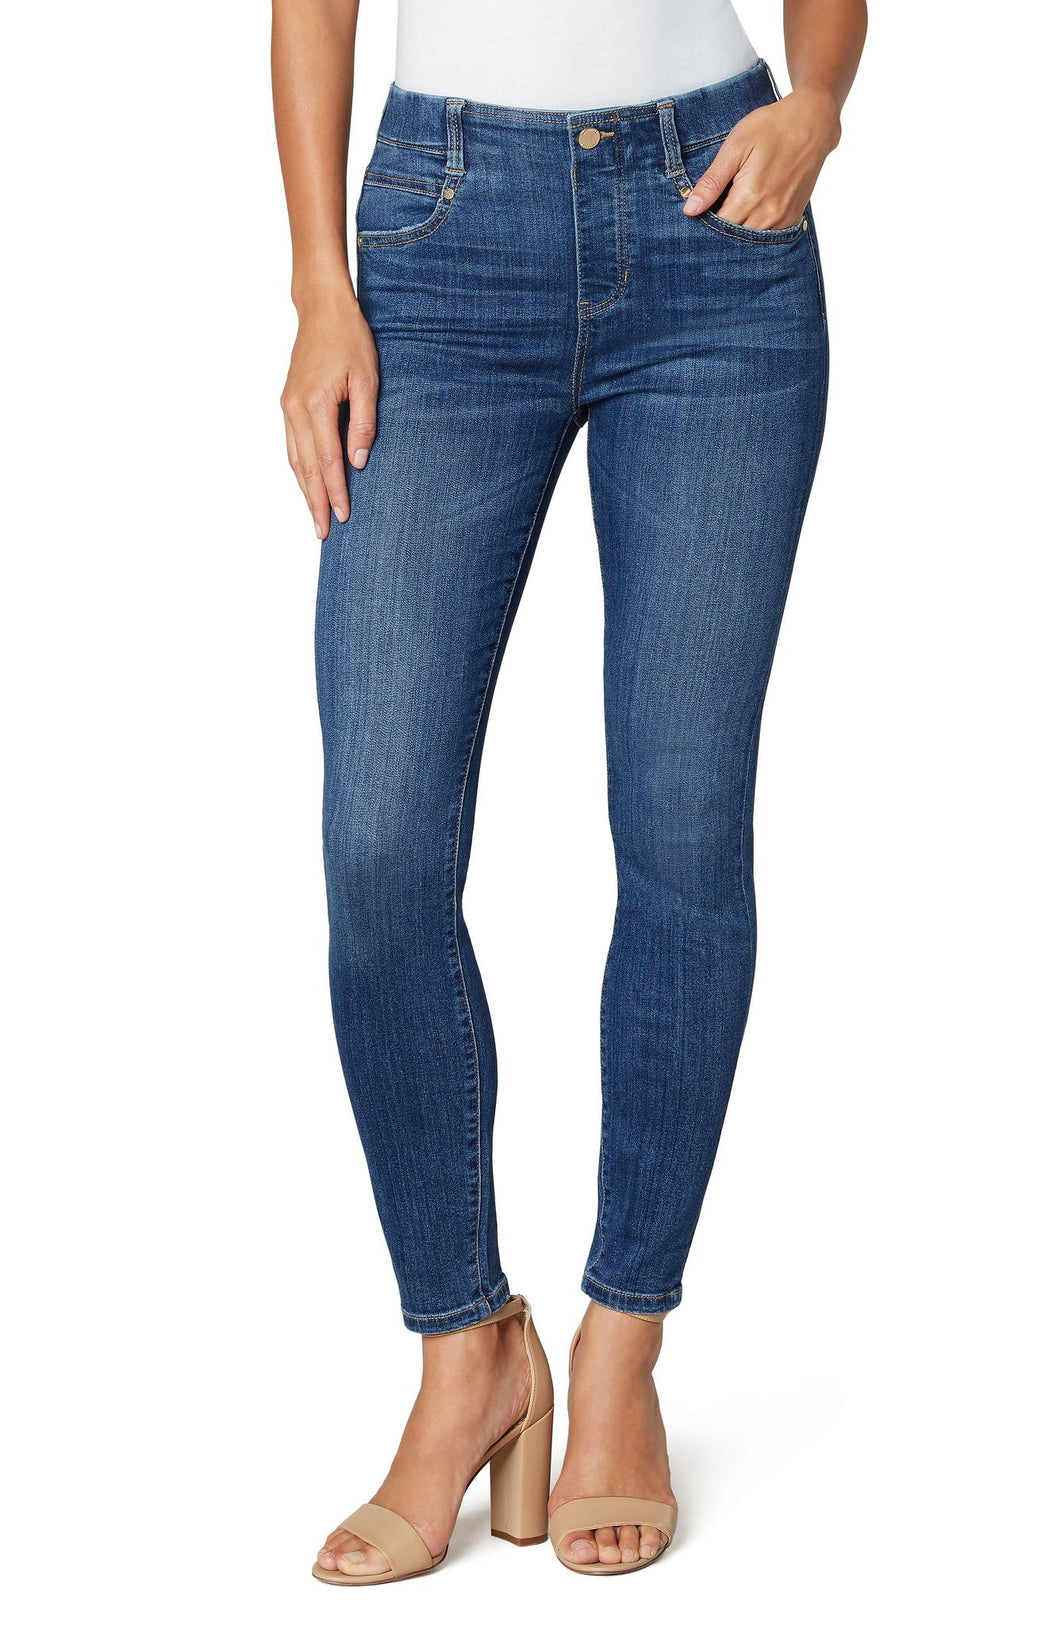 The Gia Glider Ankle Skinny by Liverpool has an amazing feel and comfort that will last throughout the day.  So easy to just pull on and go! The revolutionary fabric has beautiful stretch and top-notch recovery, preventing this gorgeous jean from becoming baggy.  A perfect piece to style any way you desire!